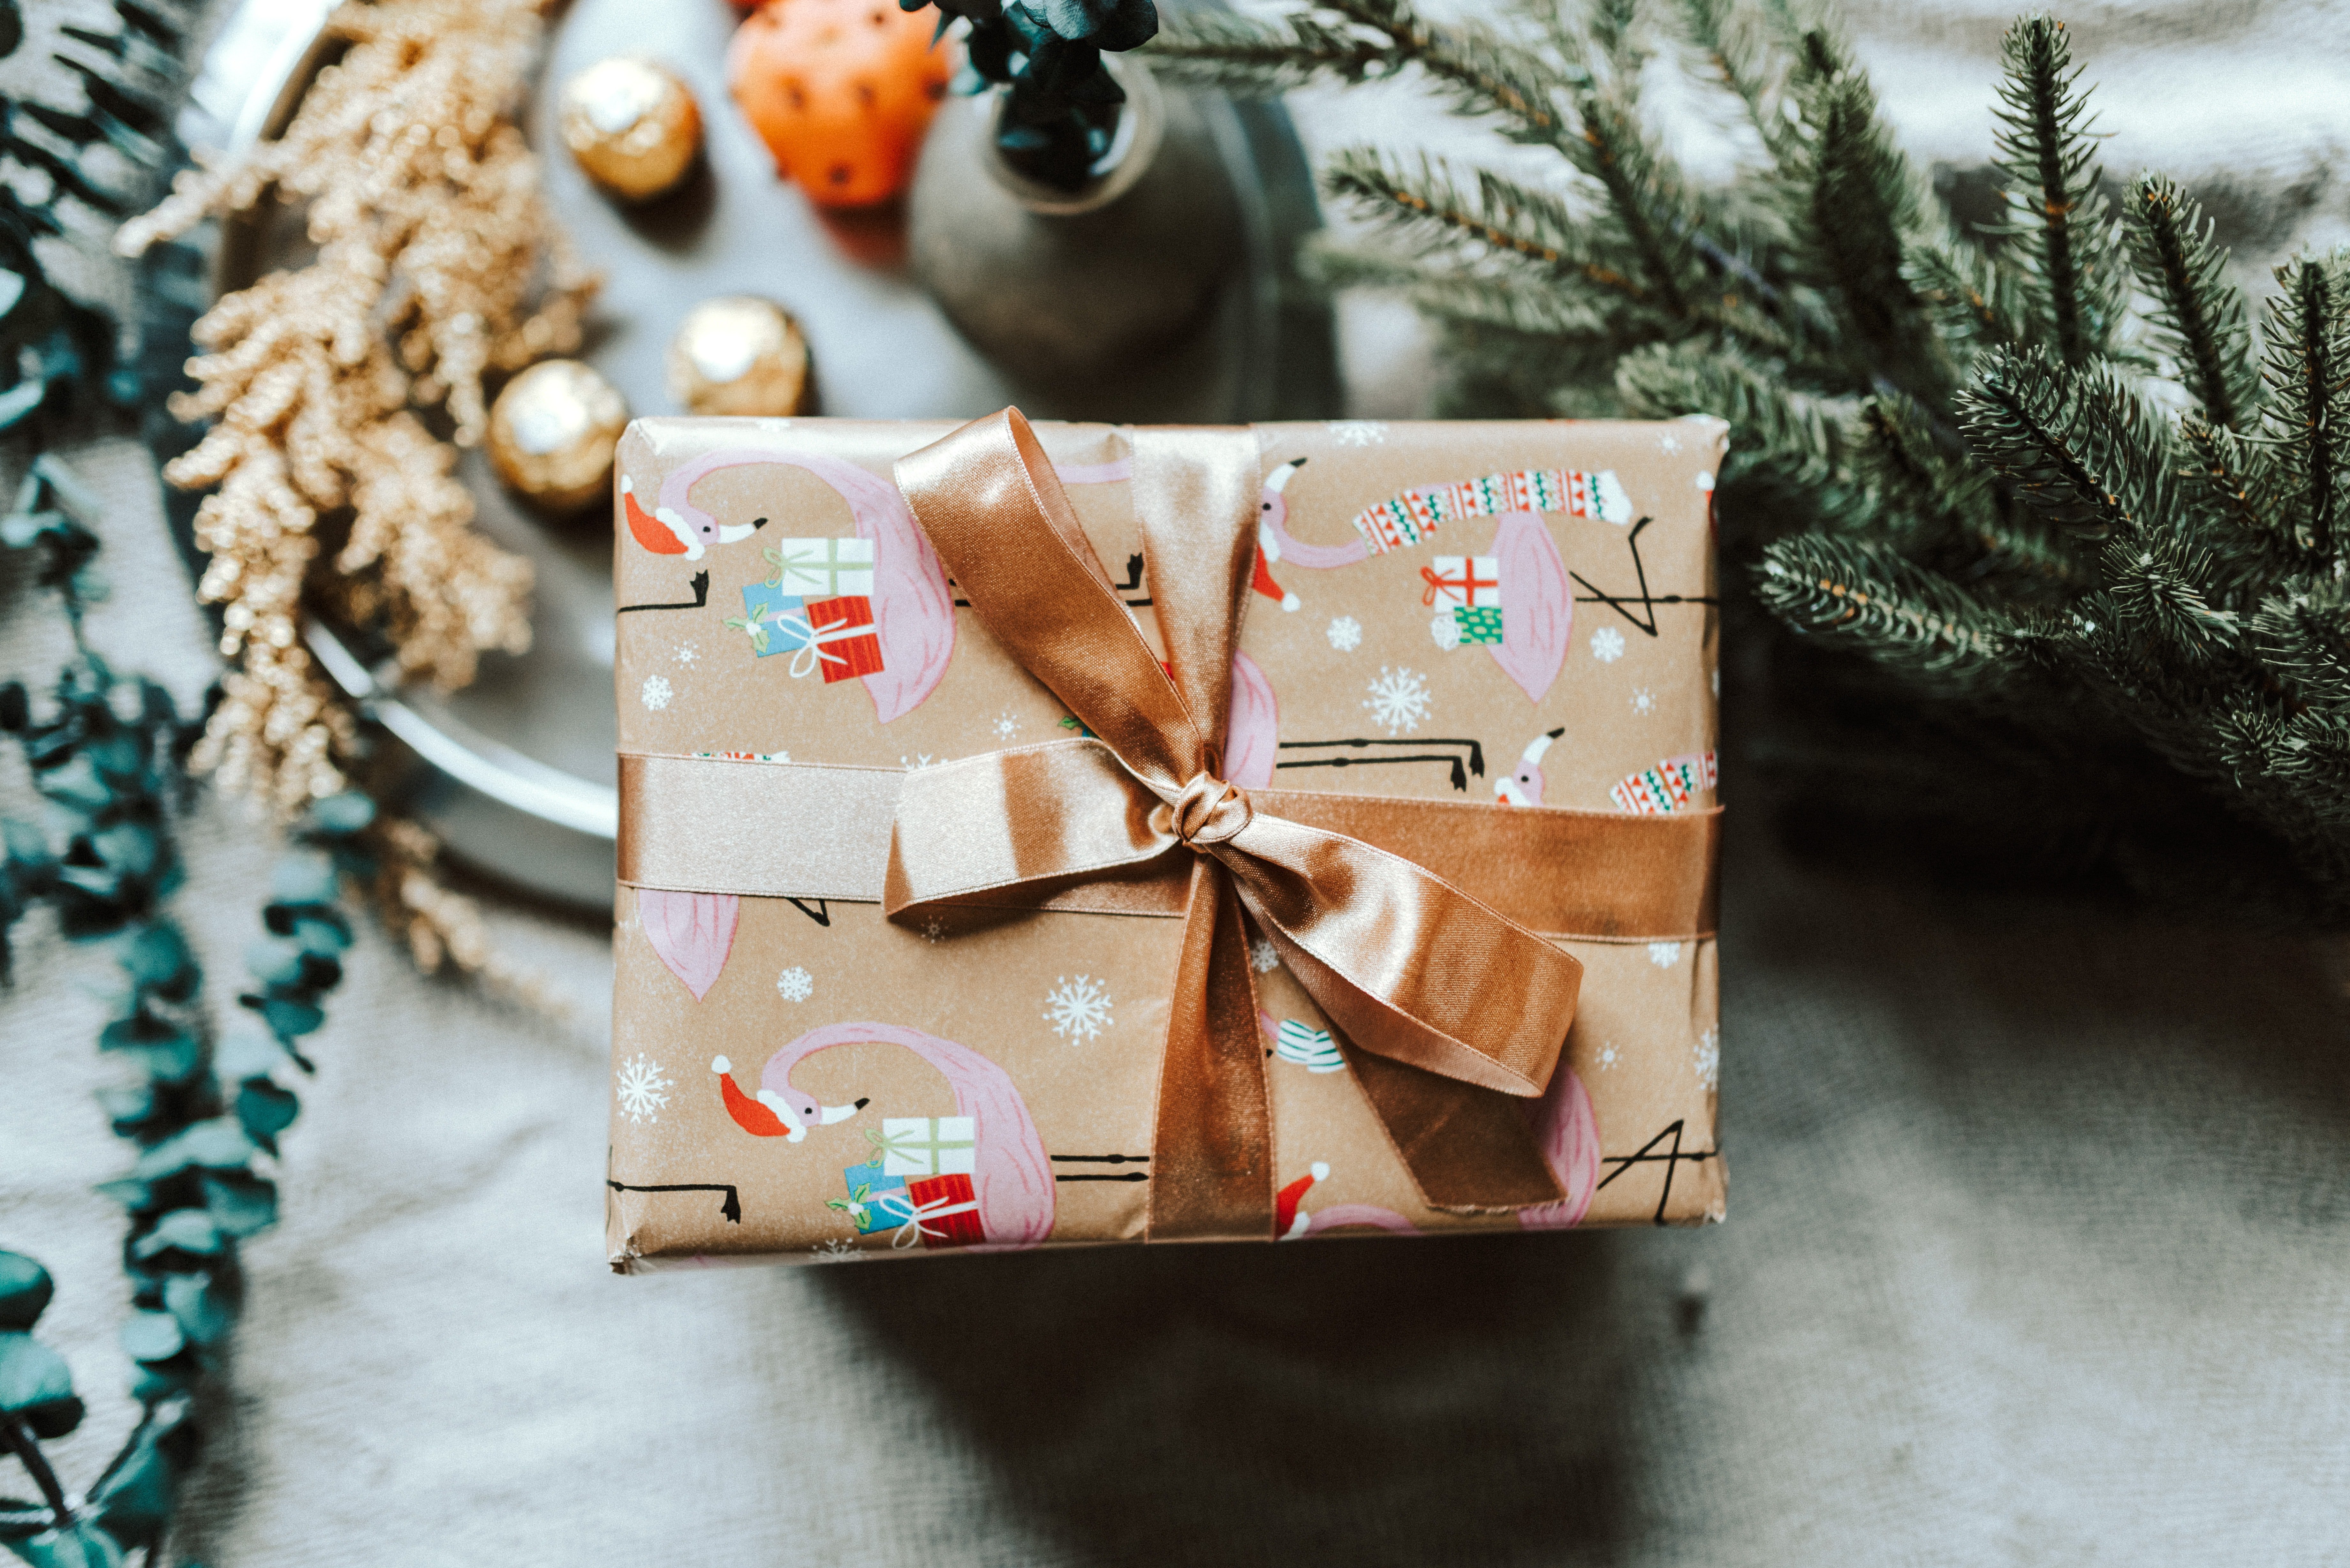 Both Agnes and Jim frowned when they opened each other's presents | Photo: Unsplash